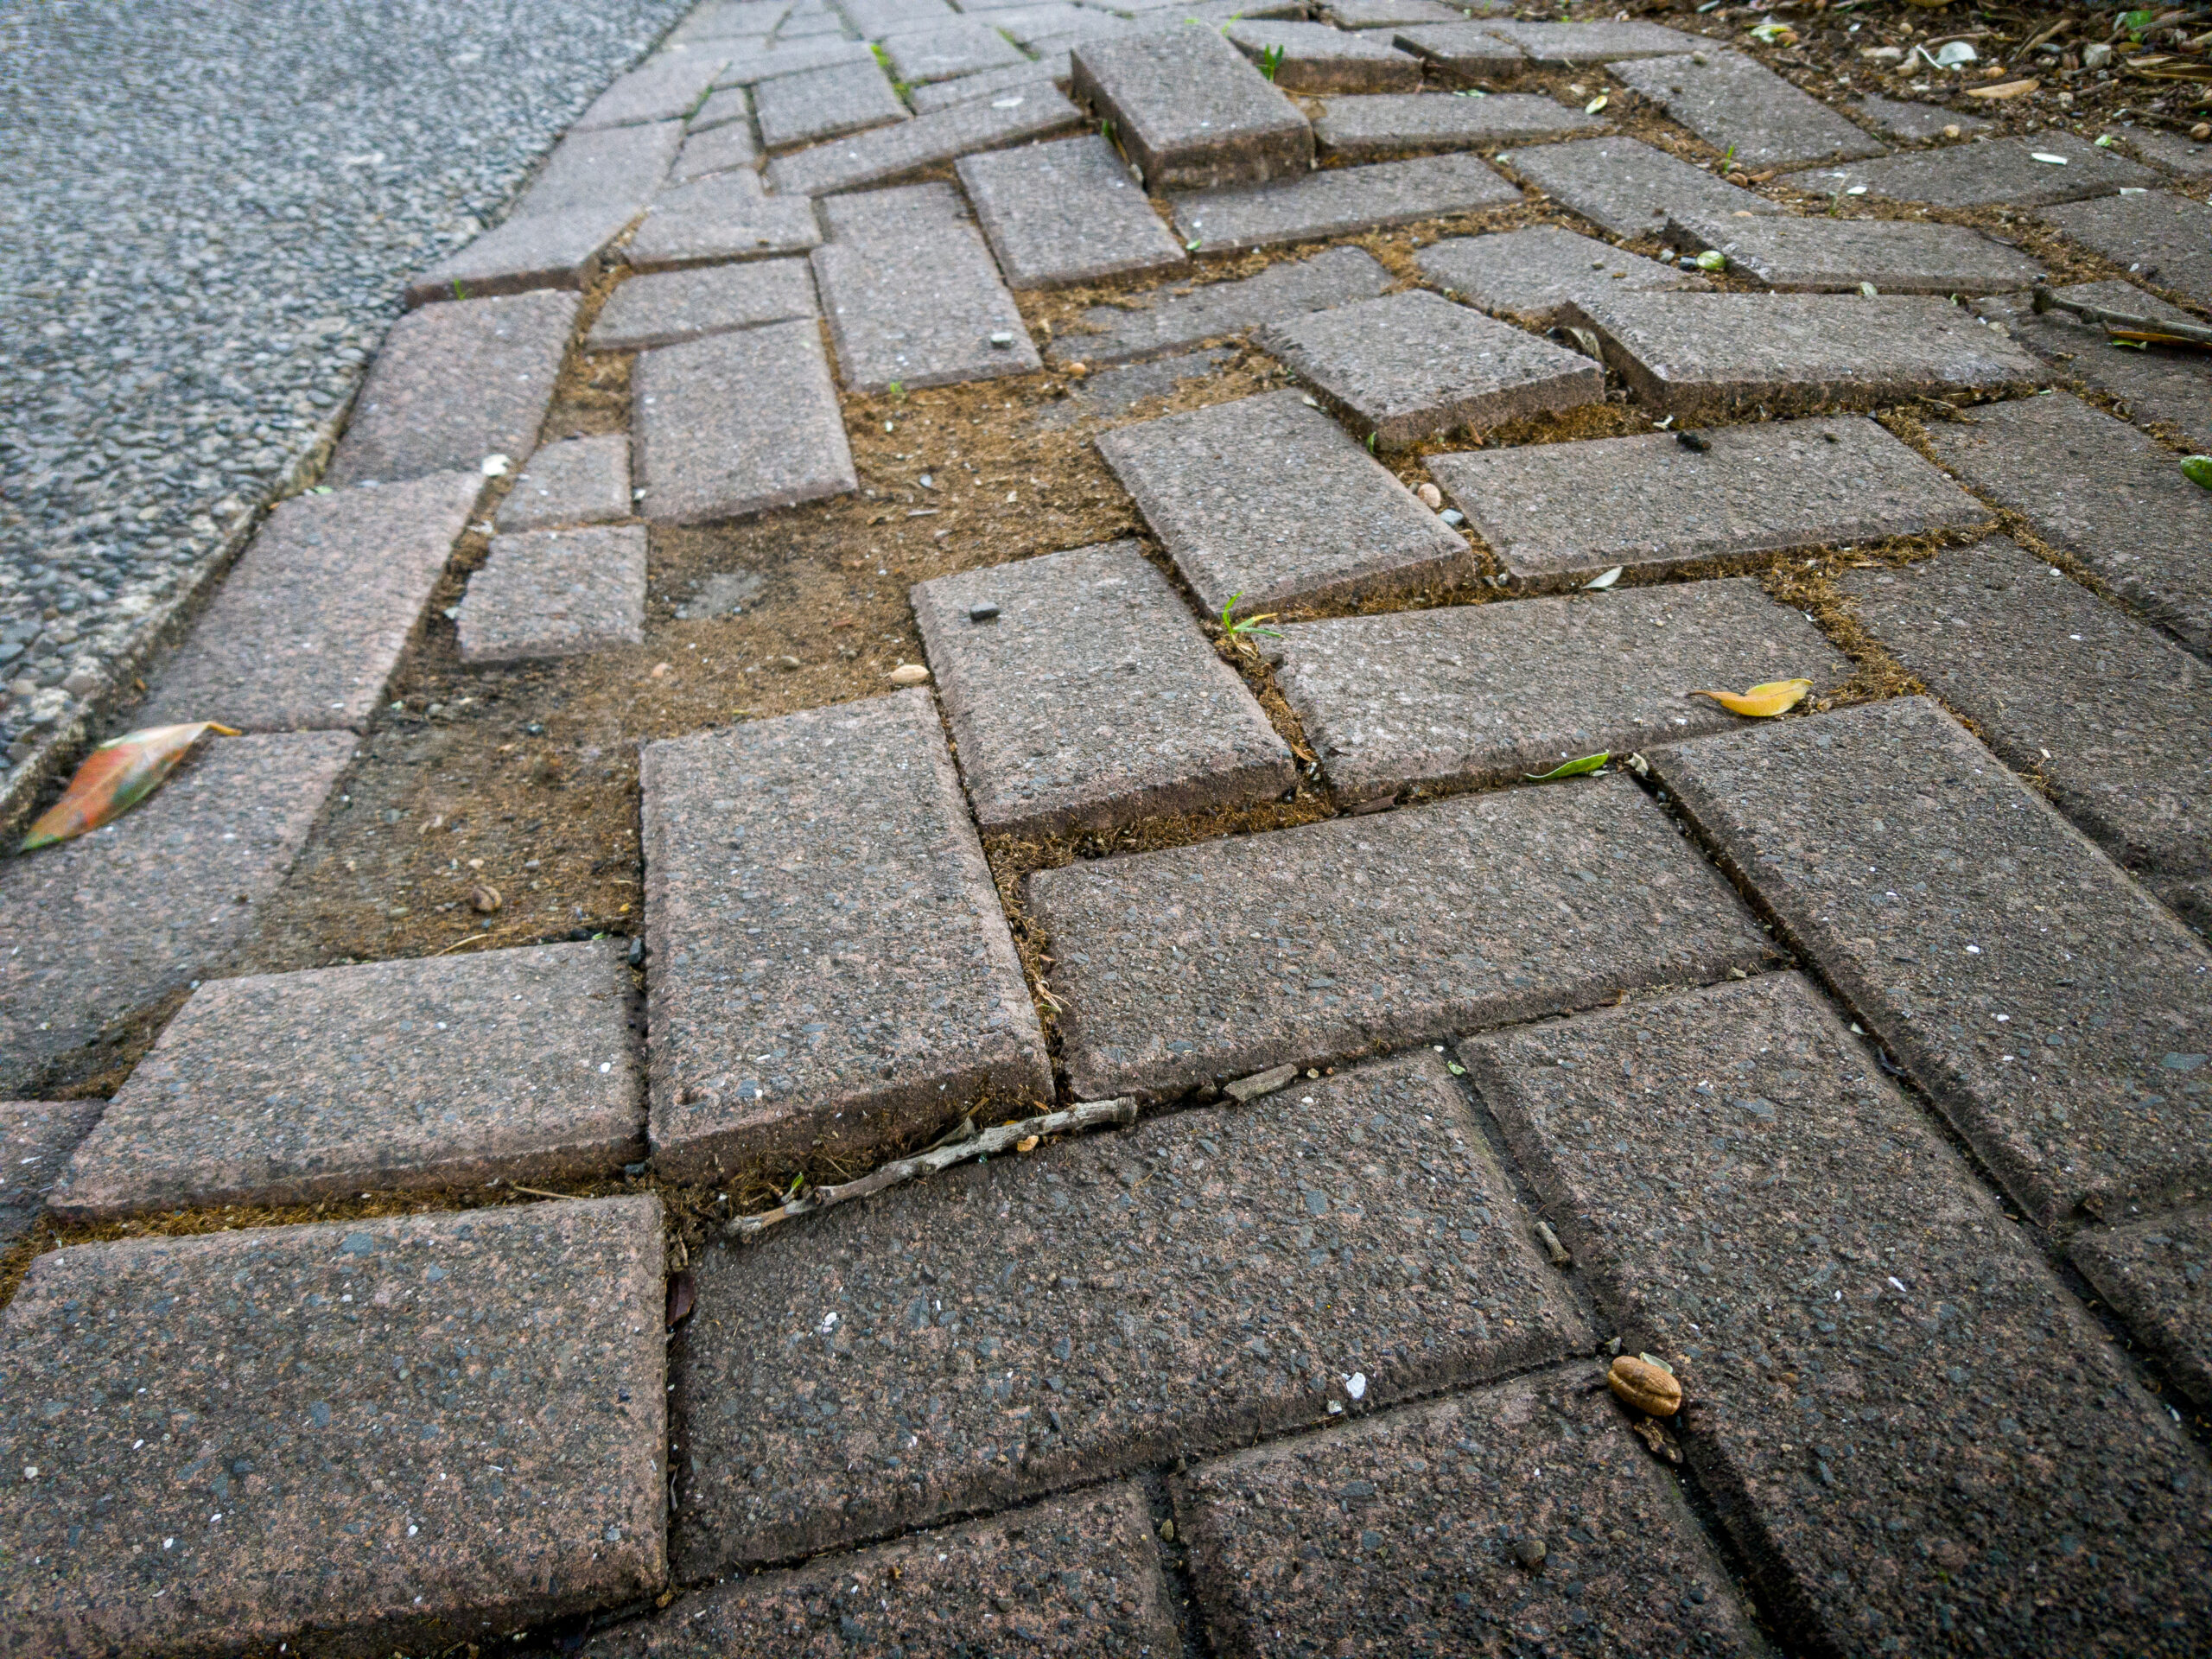 Uneven and missing pavers on a sidewalk are a tripping hazard